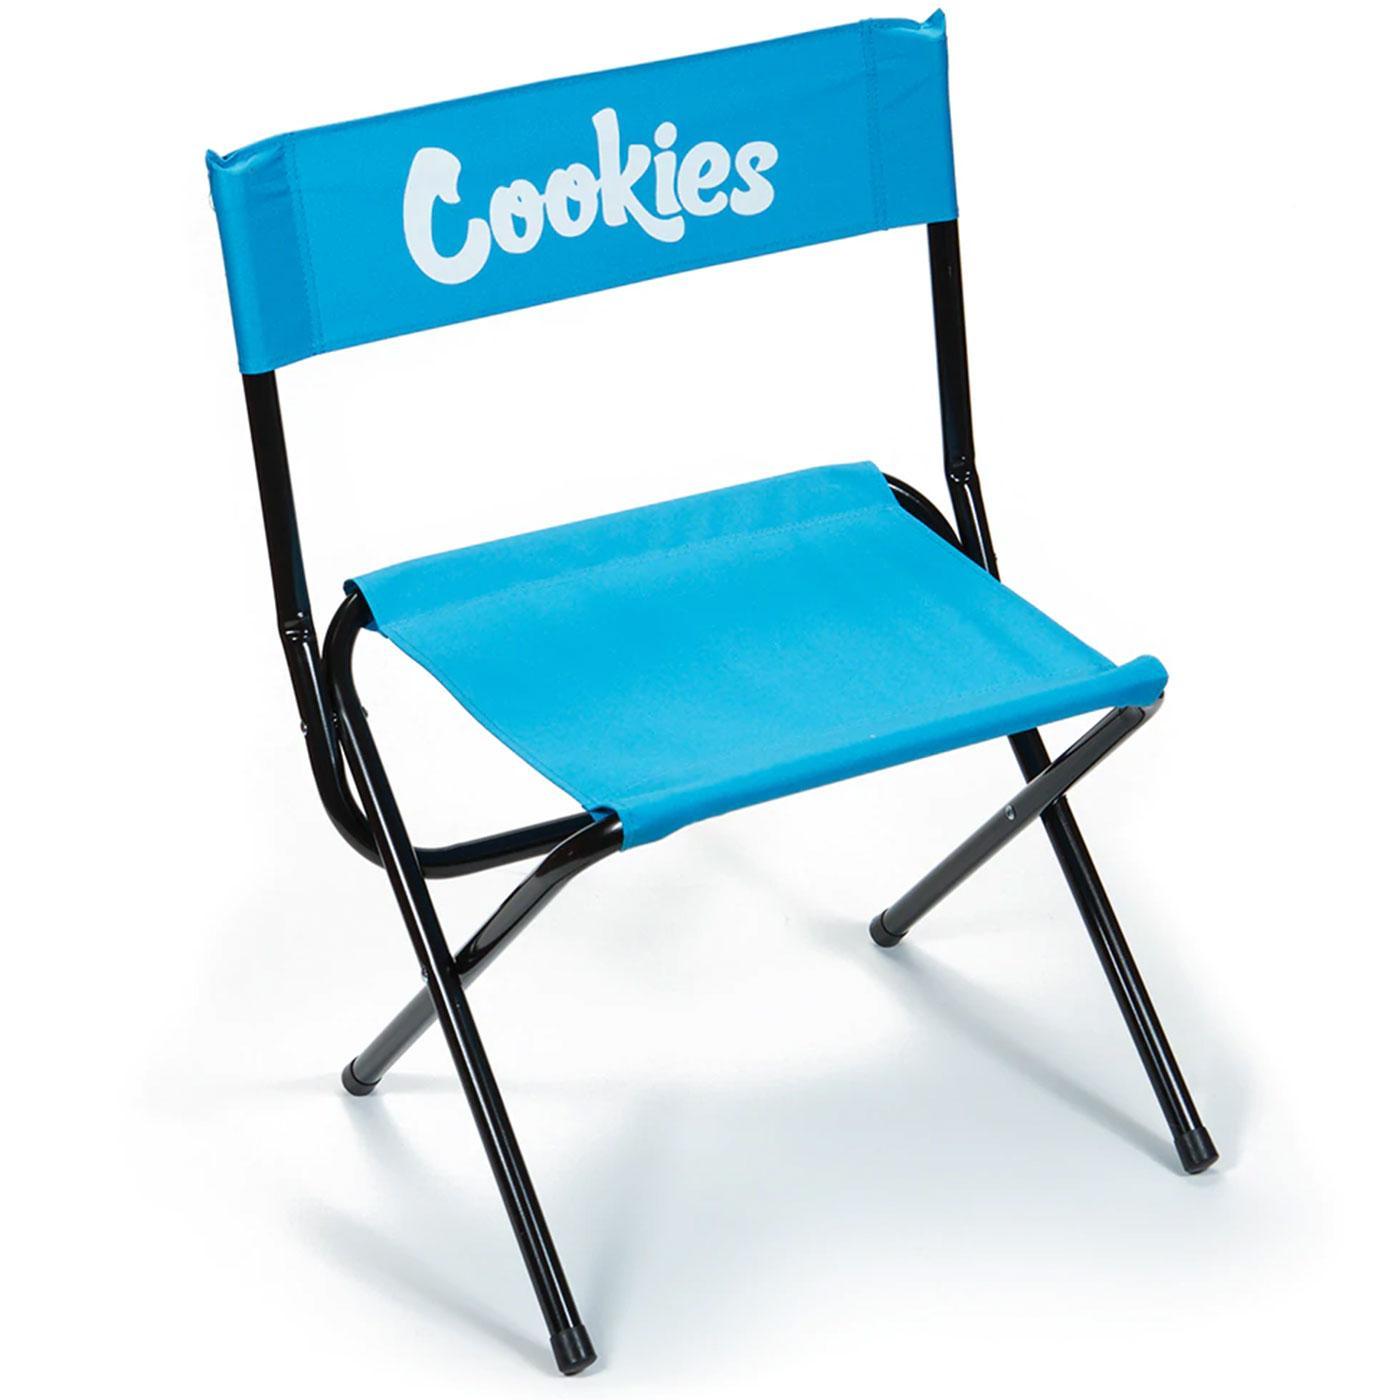 Cookies Folding Chair (Blue) | Cookies Clothing